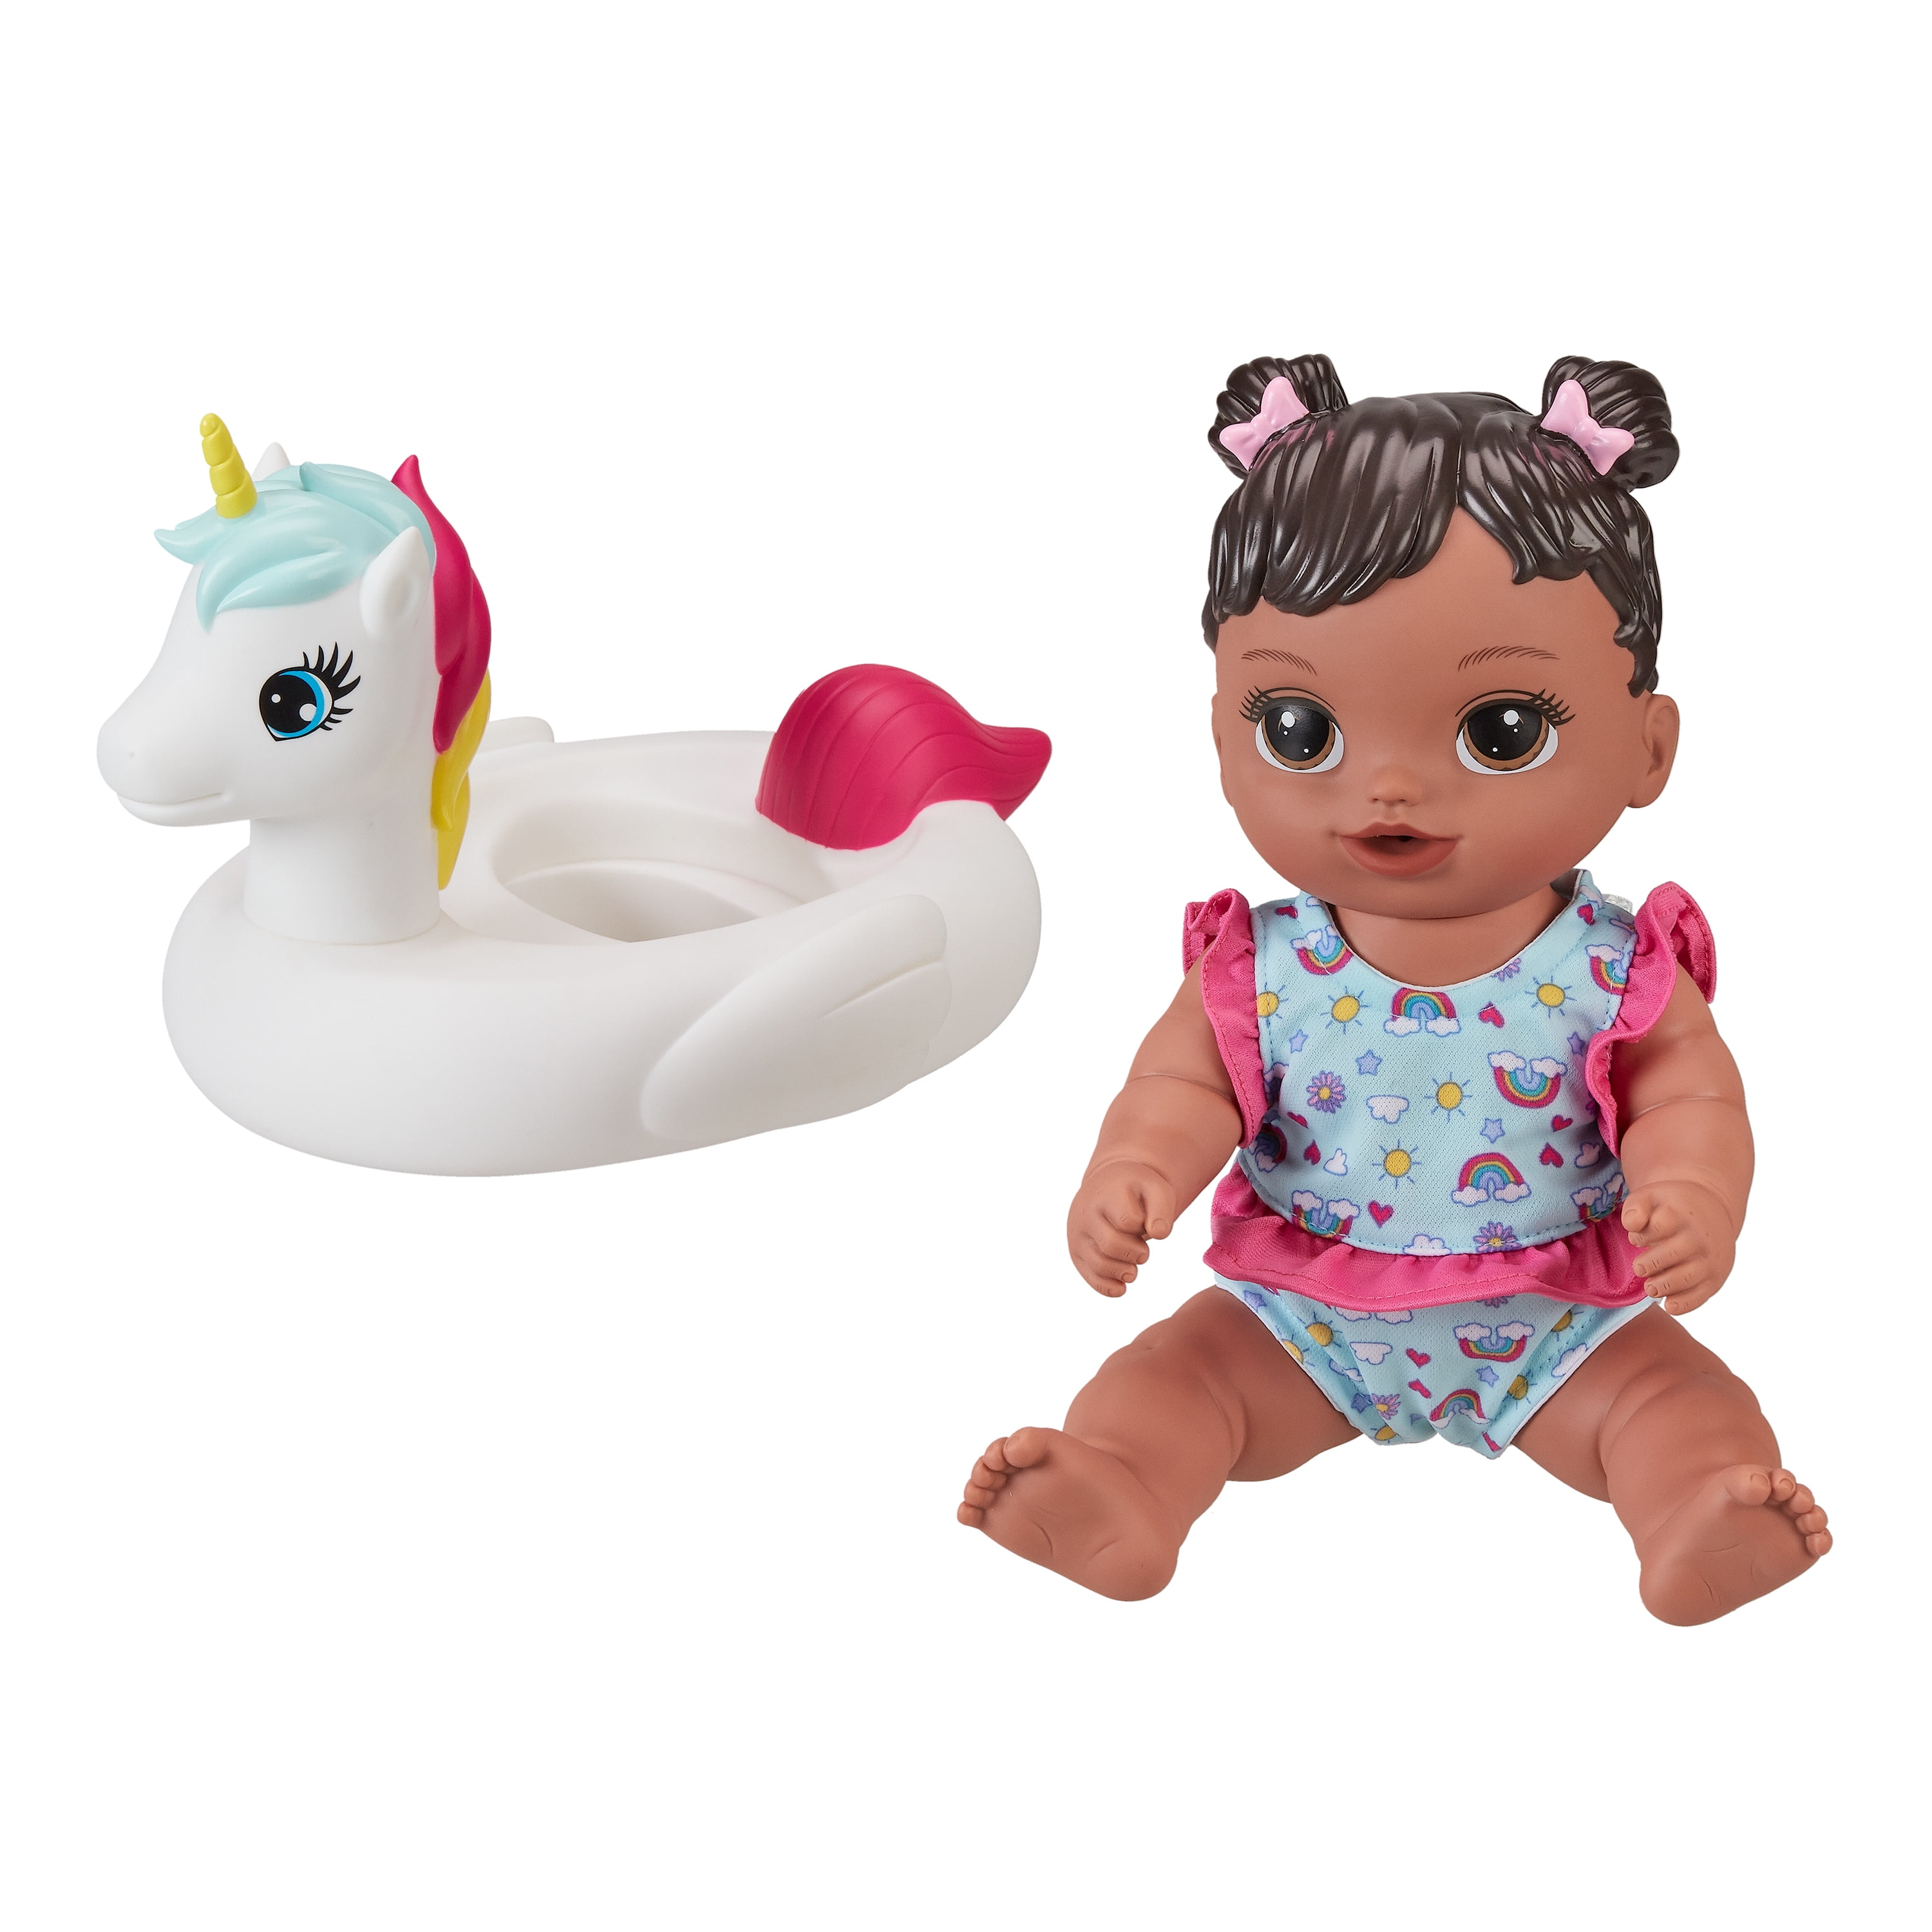 My Sweet Love Soft Baby and Unicorn Floaty Play Set, 2 Pieces, African American